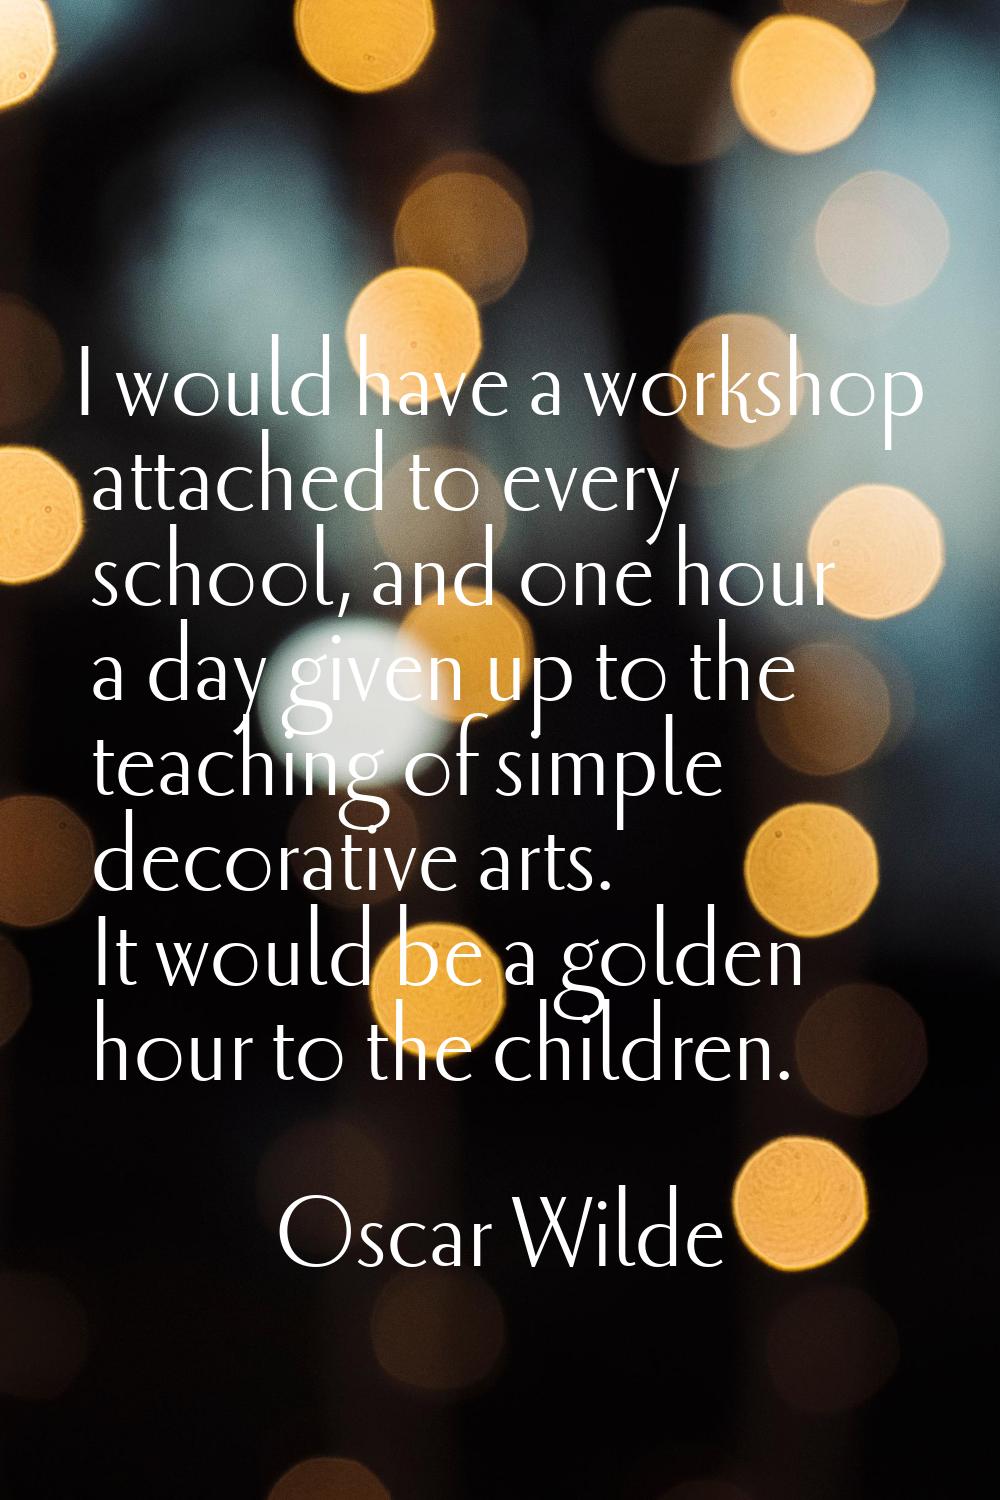 I would have a workshop attached to every school, and one hour a day given up to the teaching of si